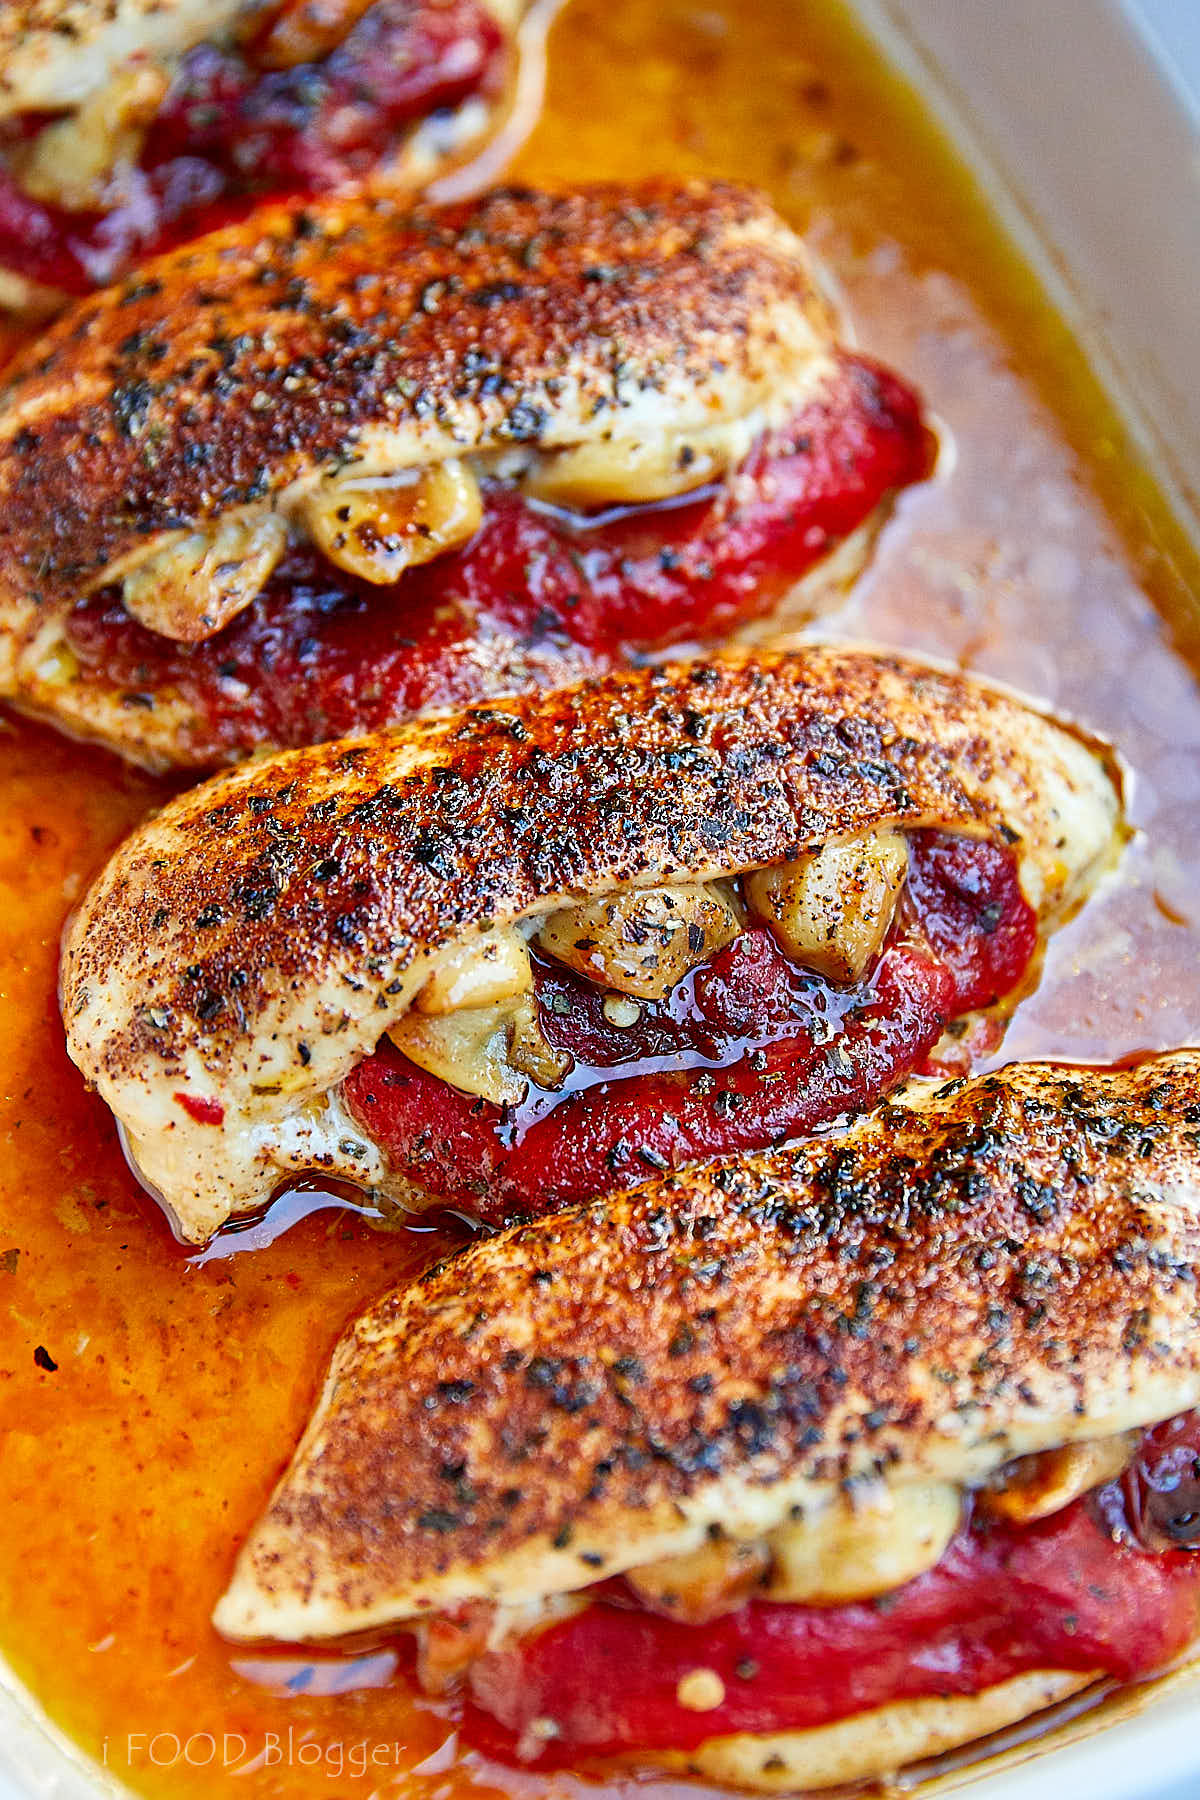 Roasted Pepper and Garlic Baked Stuffed Chicken Breast - i FOOD Blogger